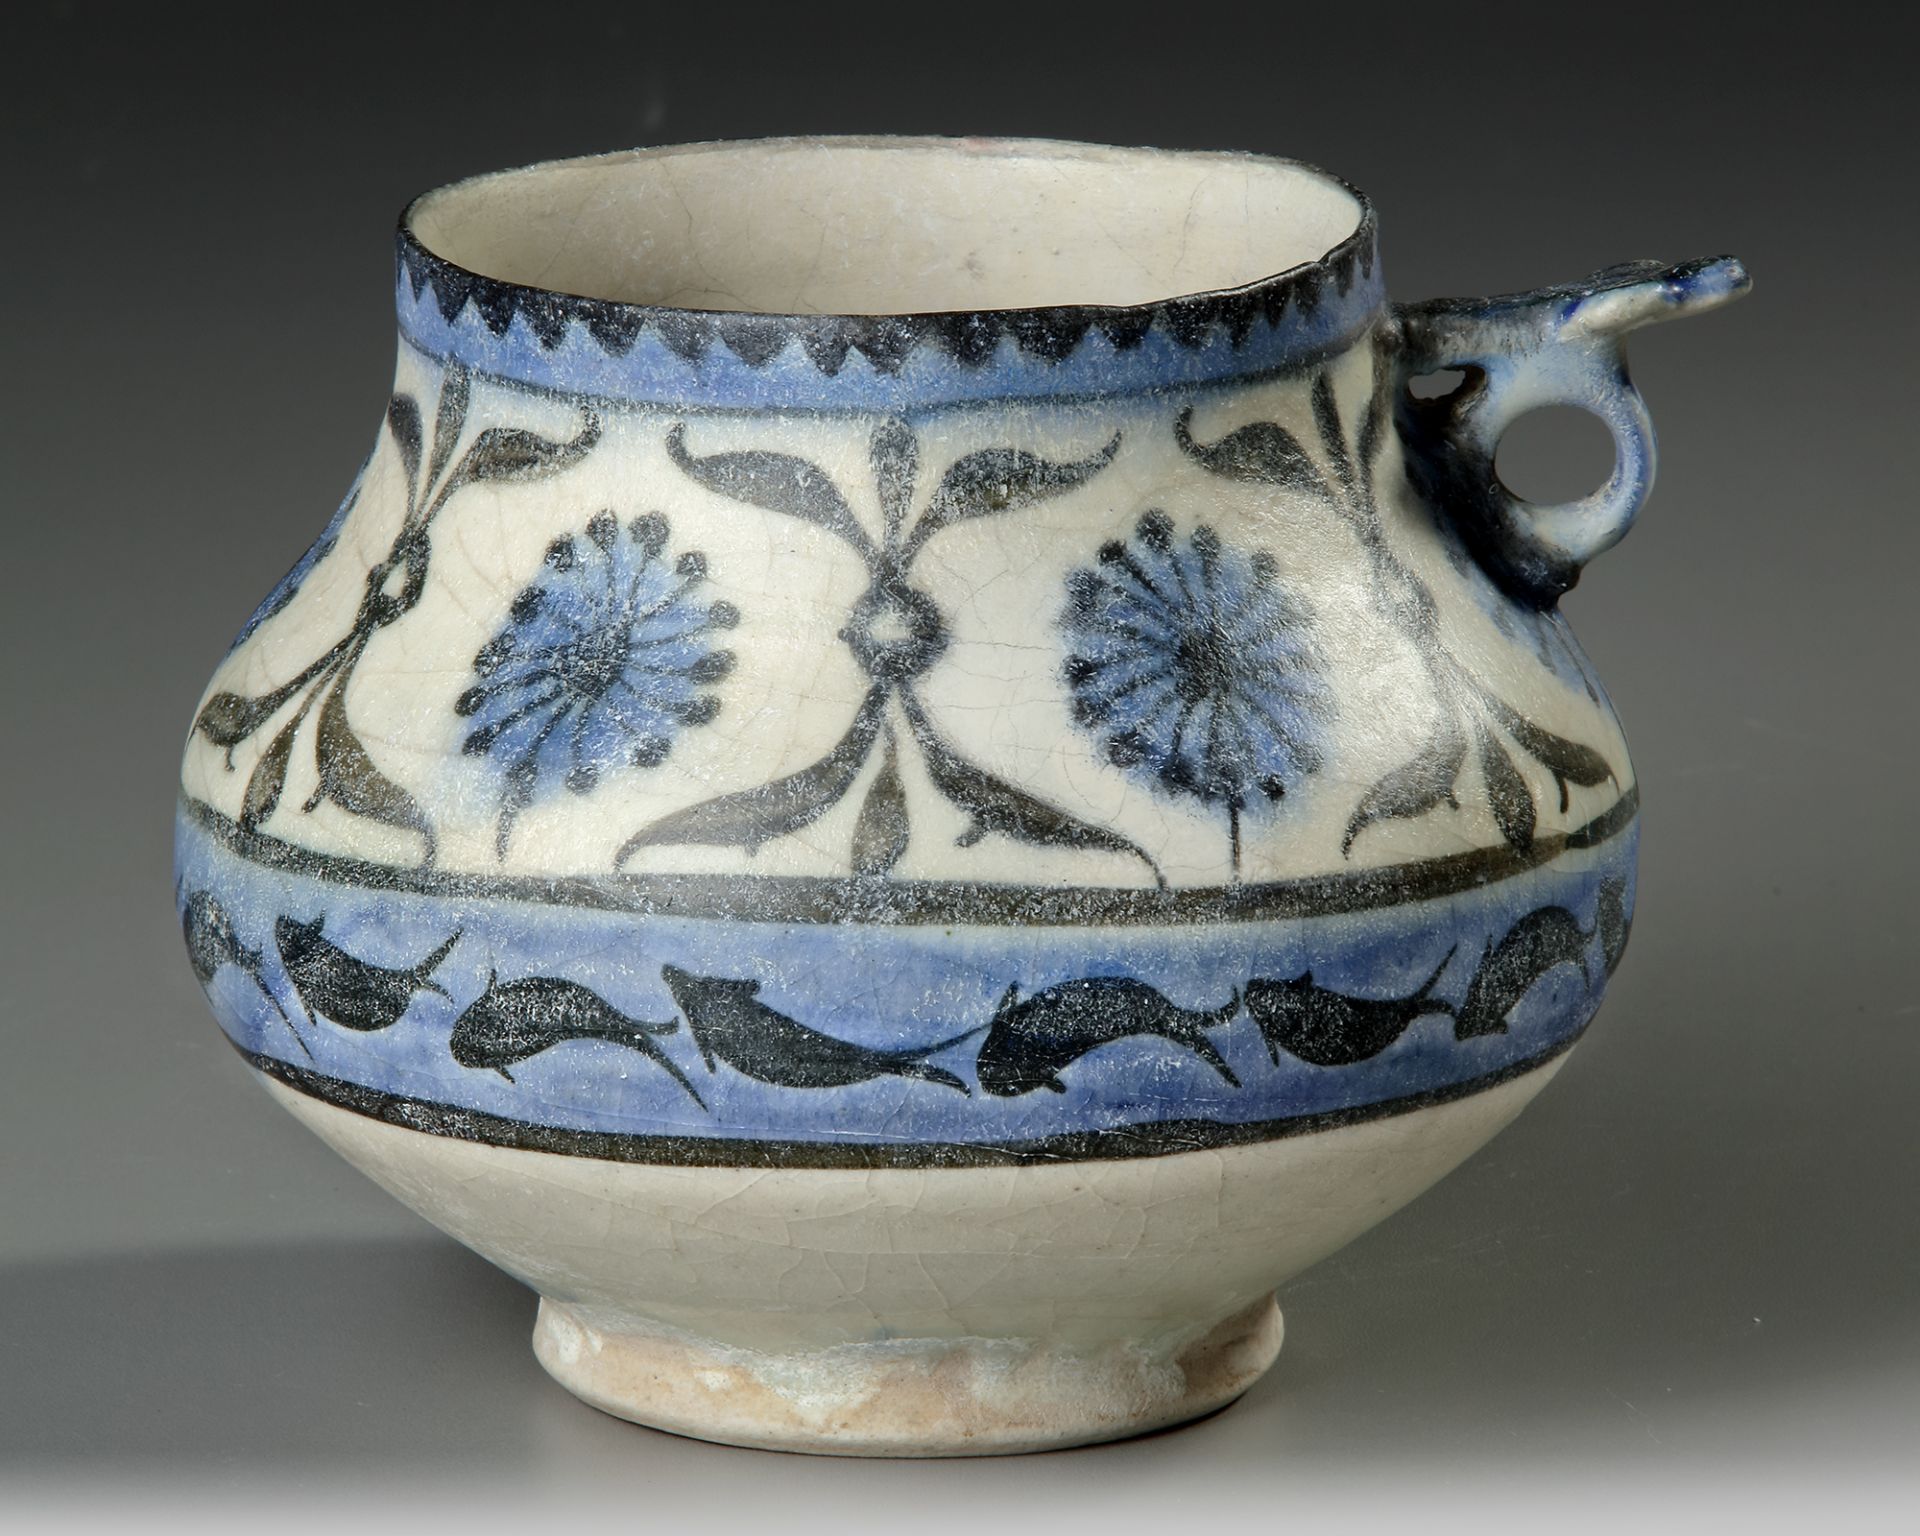 A KASHAN POTTERY JUG, PERSIA, EARLY 13TH CENTURY - Image 4 of 8